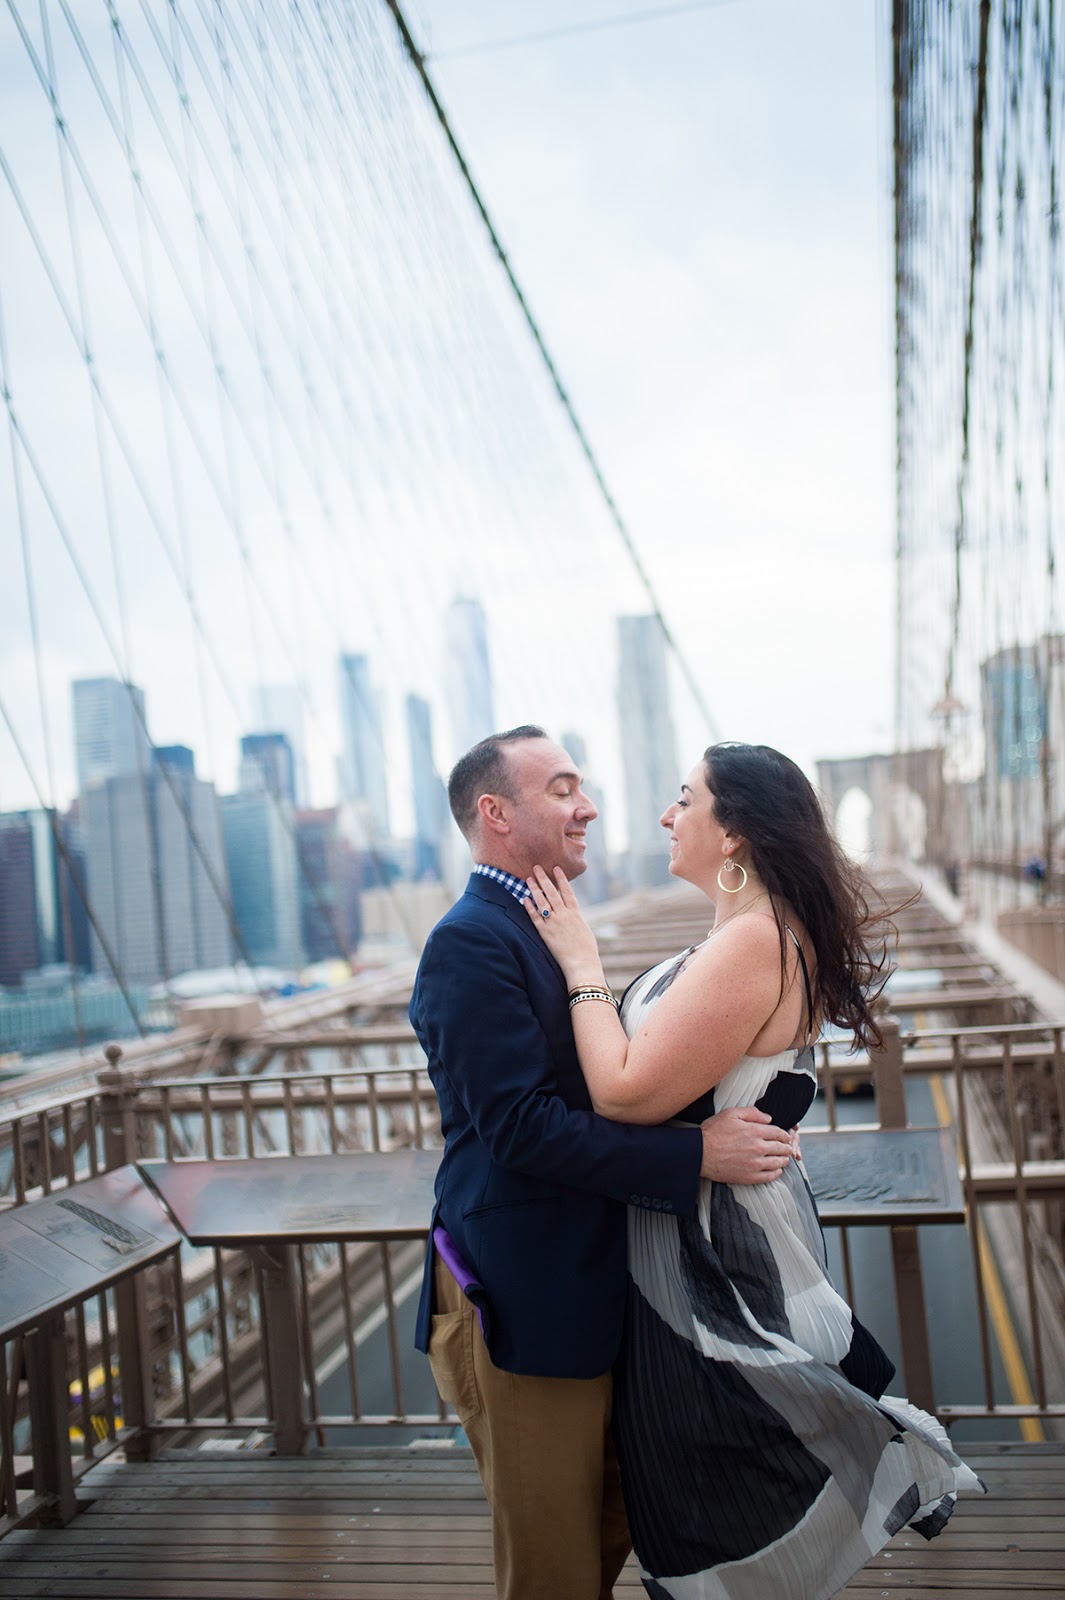 Wedding Wednesday :: Choosing a Long or Short Engagement :: Effortlessly with Roxy